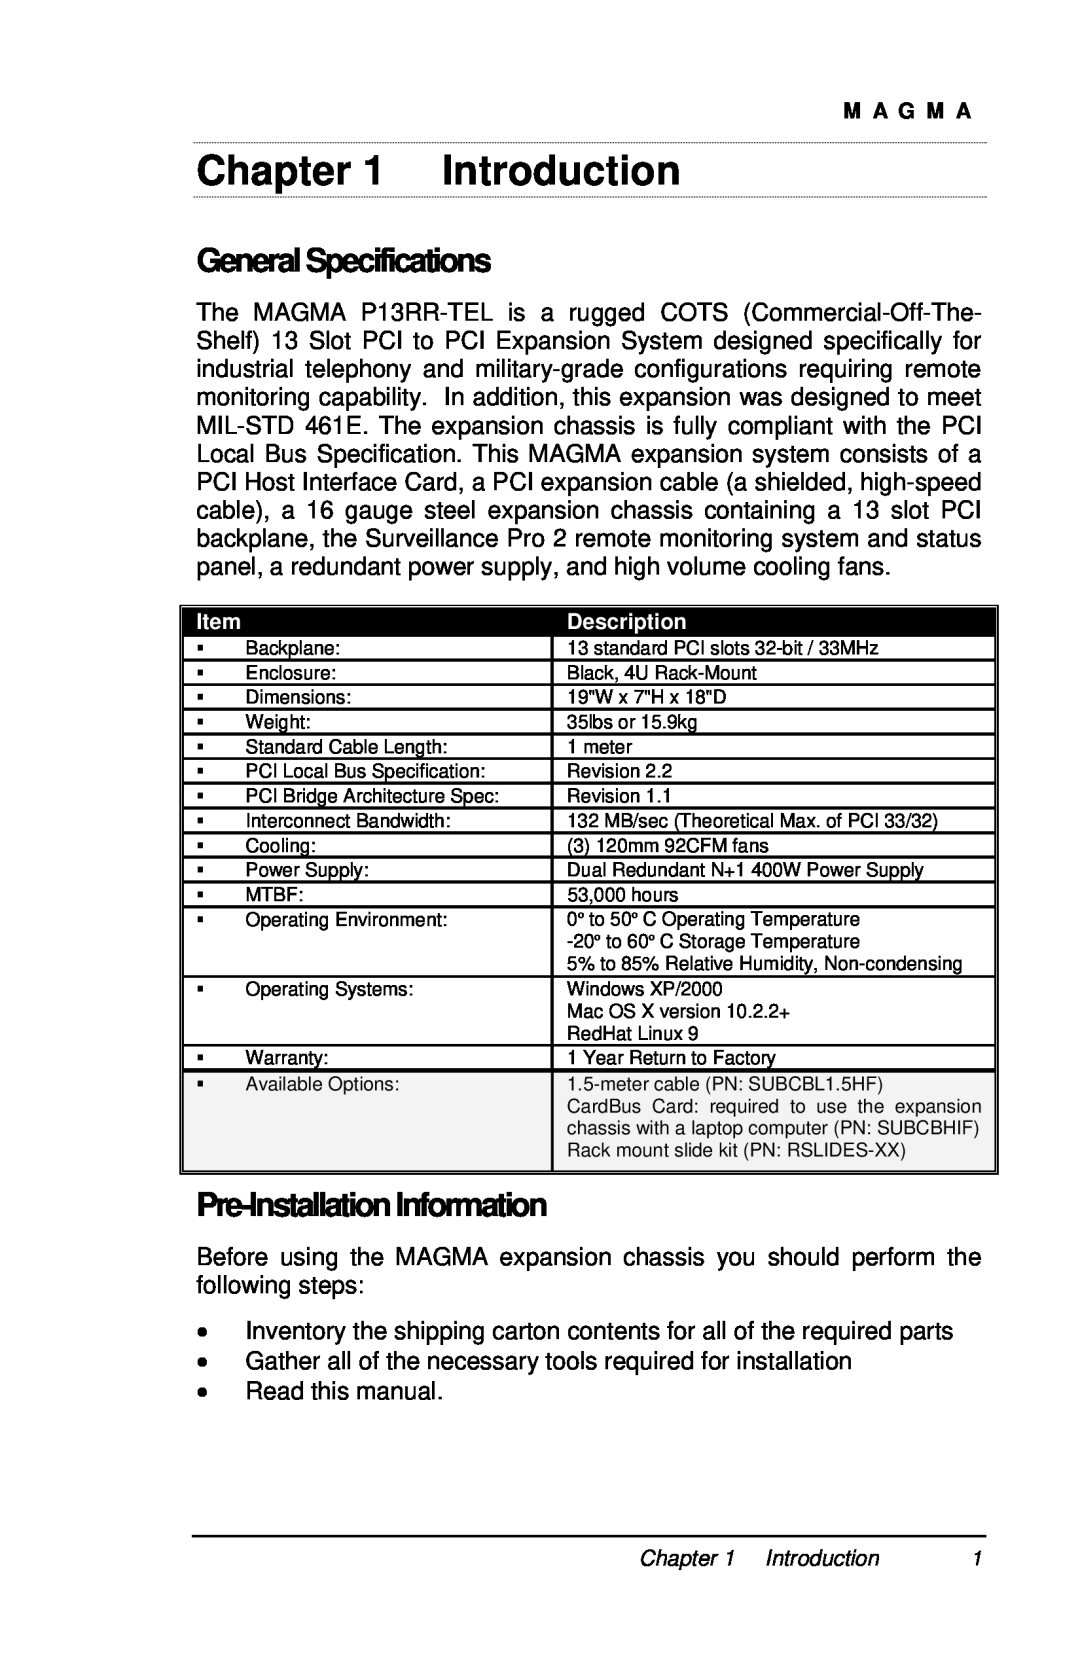 Magma P13RR-TEL user manual Introduction, General Specifications, Pre-InstallationInformation, M A G M A, Description 